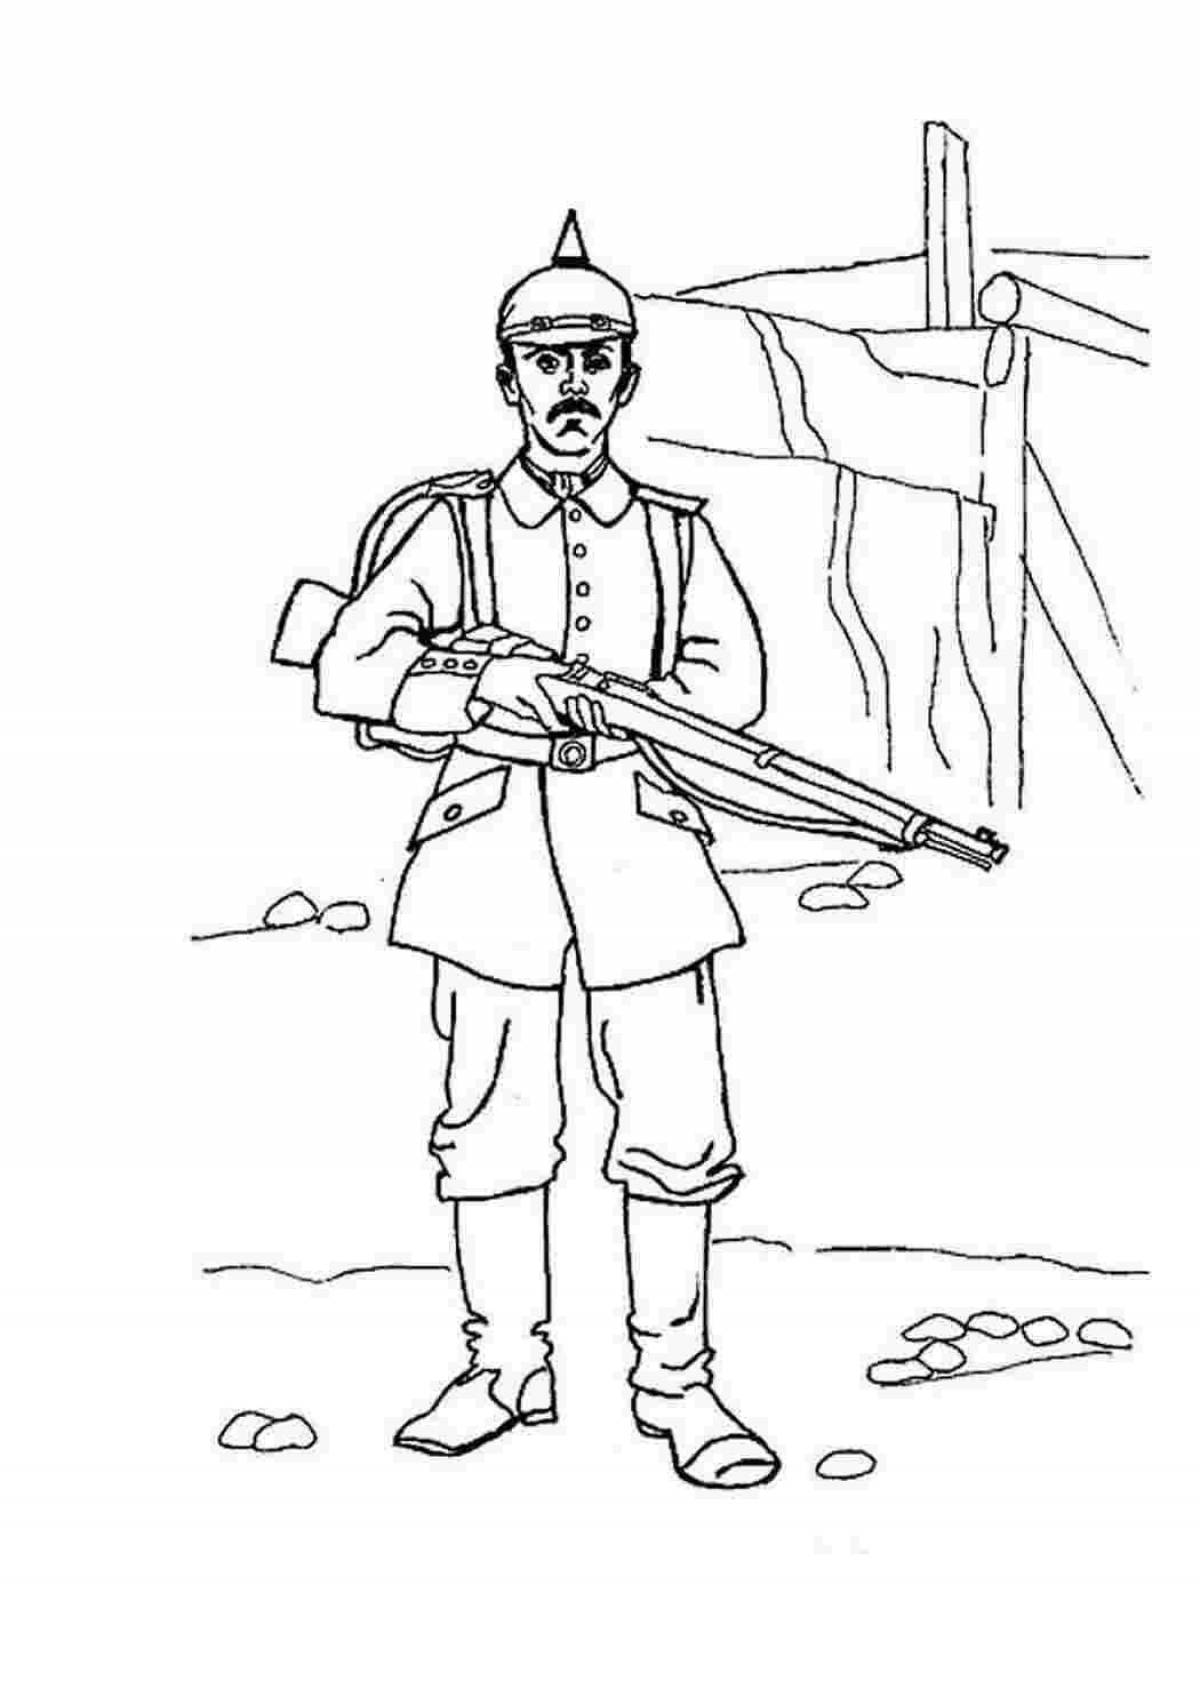 Coloring book famous soldier of the ussr